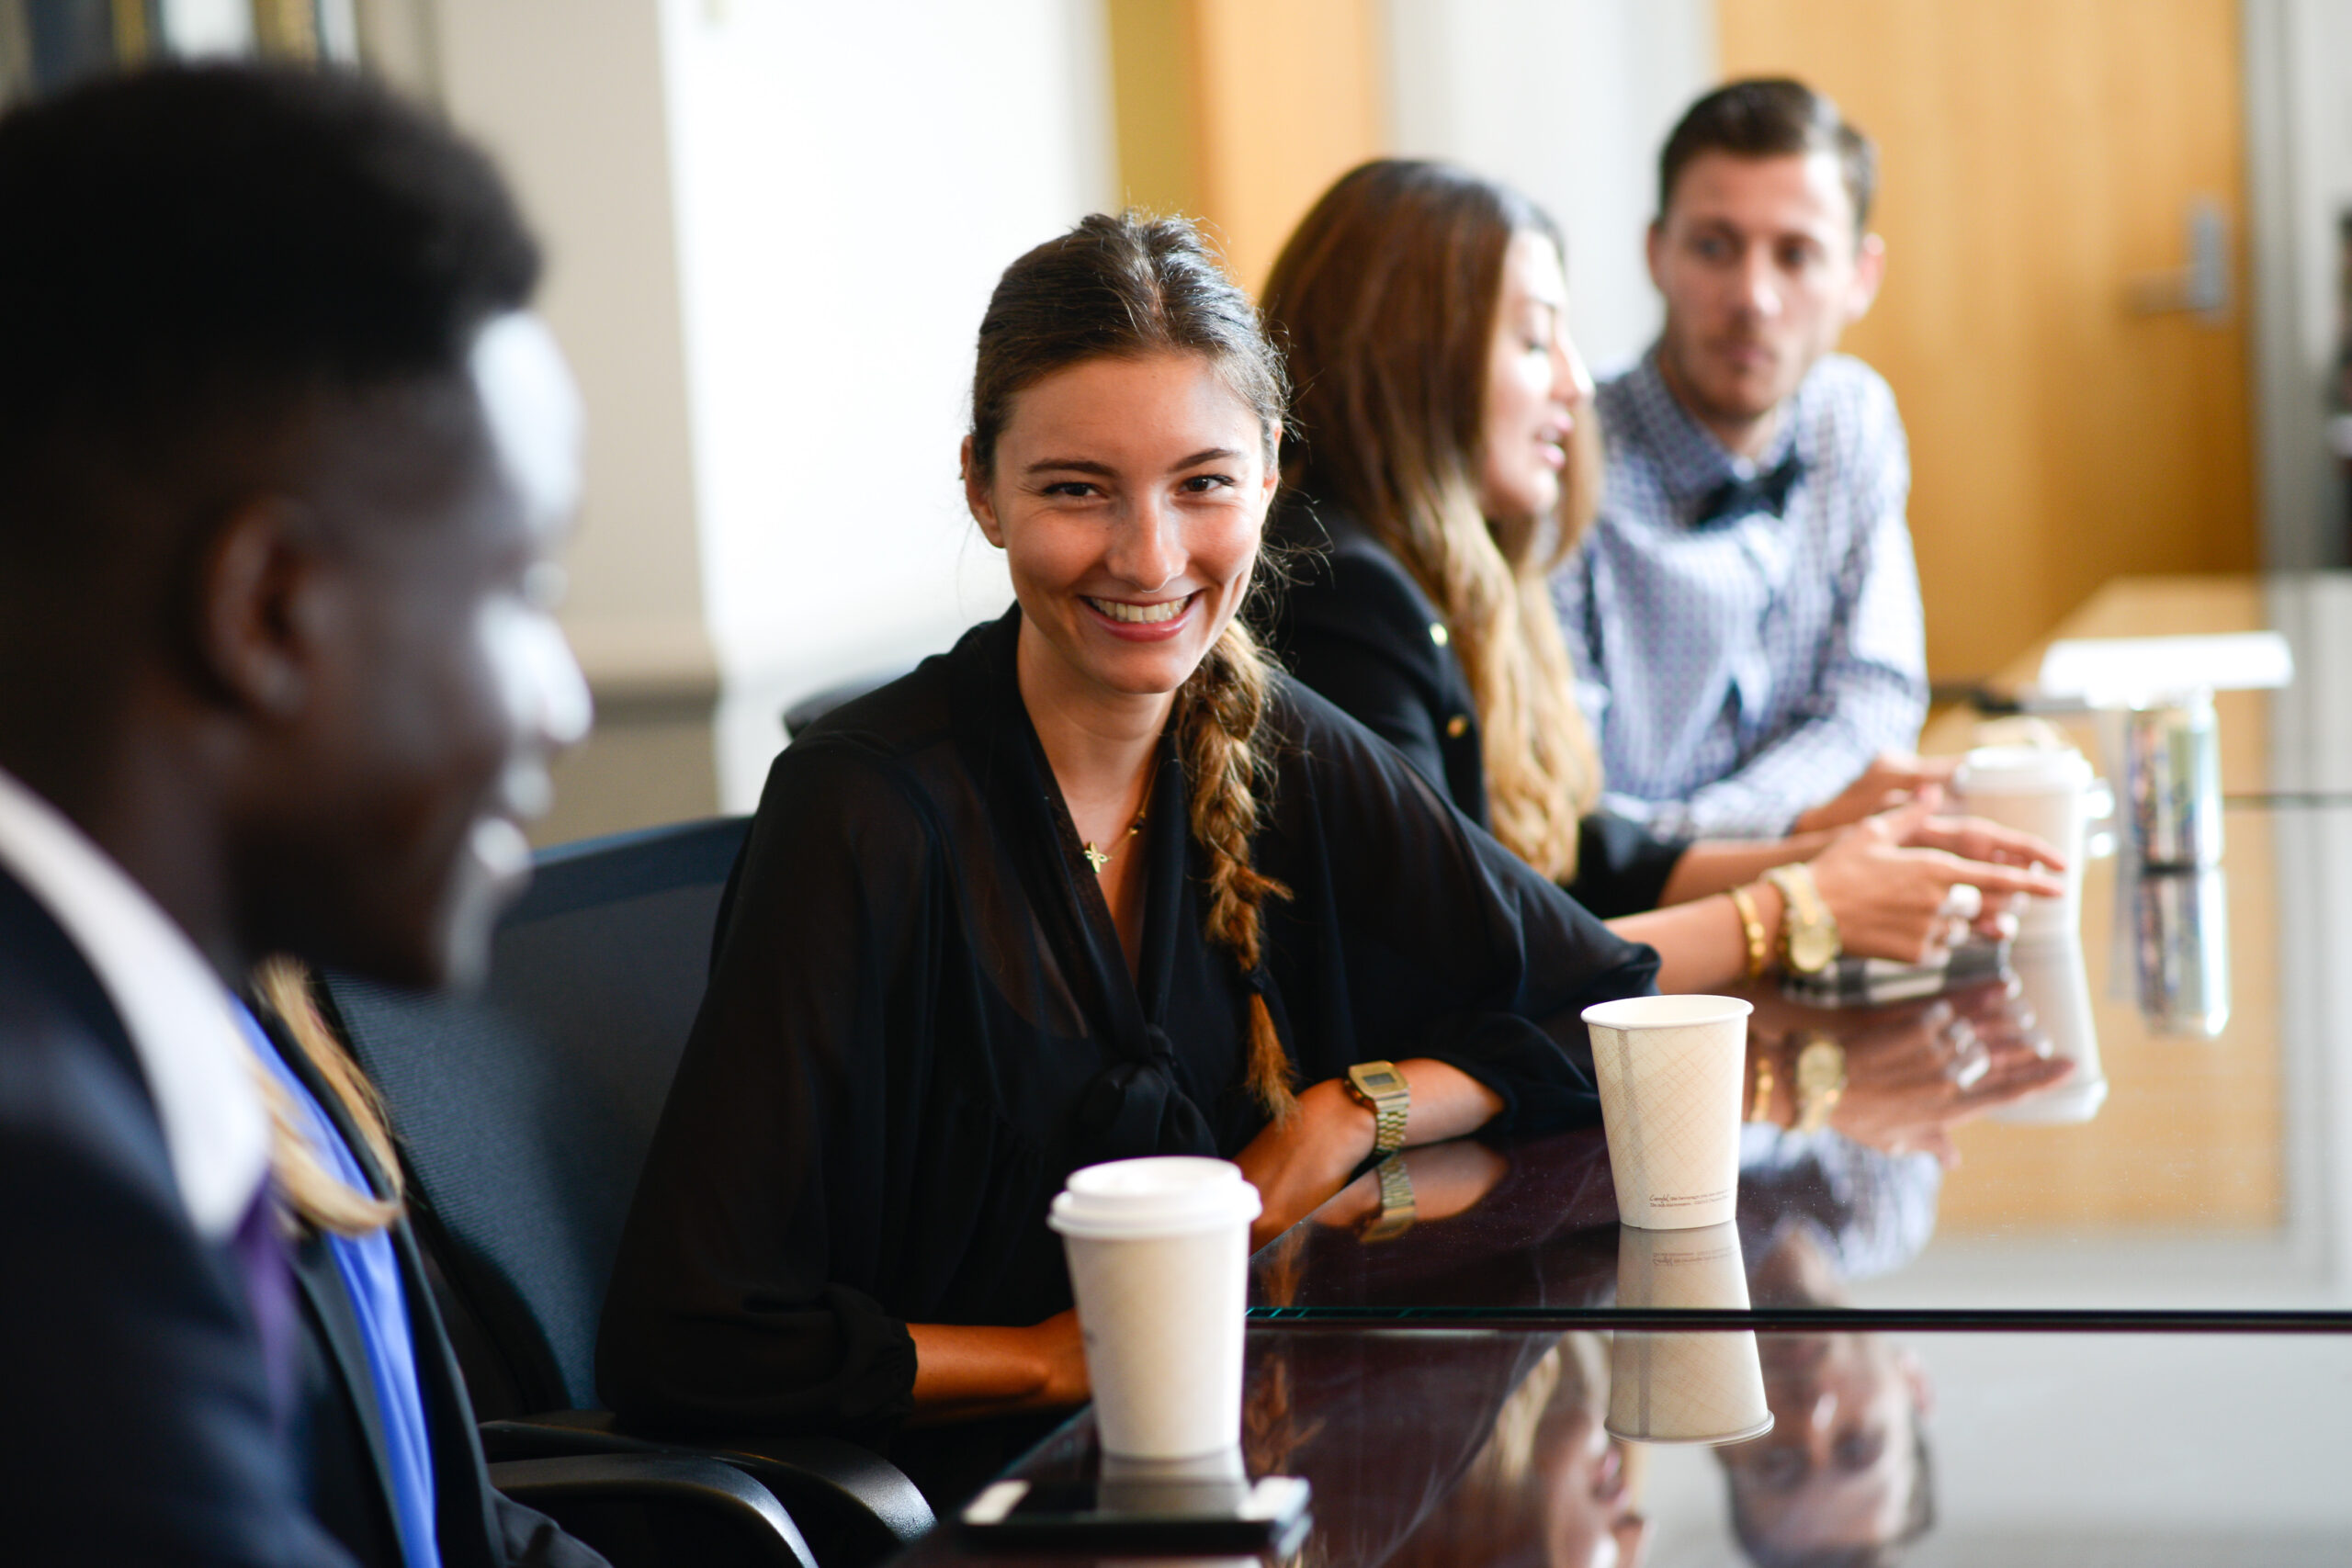 Header for Internship Page and Serves as a link to the Career Page - Student smiling at conference table